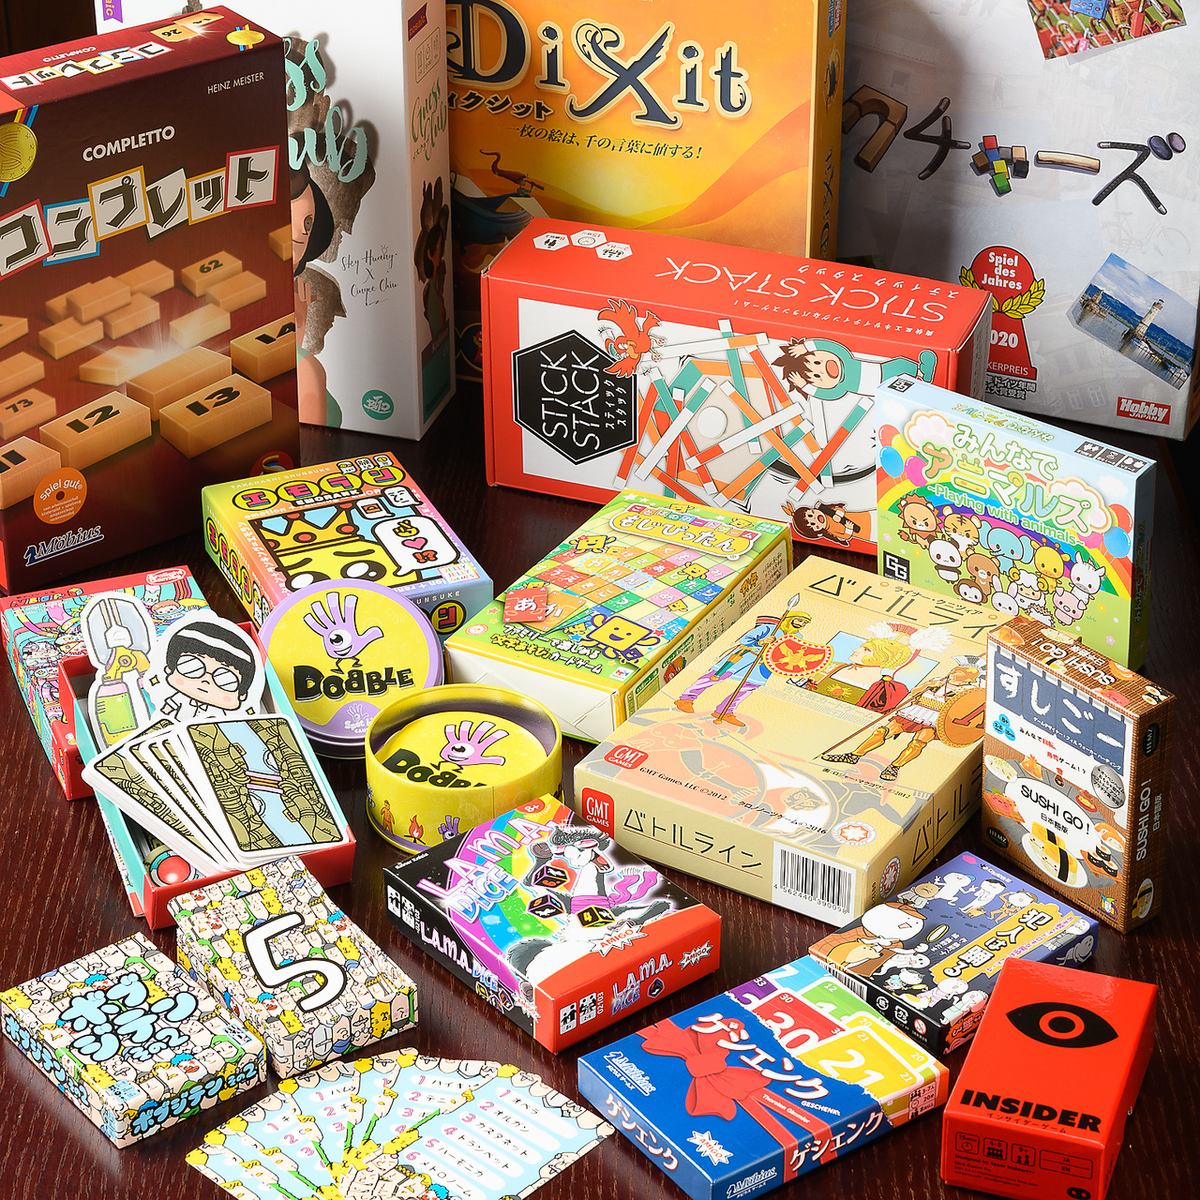 Play board games and watch baseball! An izakaya that both adults and children can enjoy!